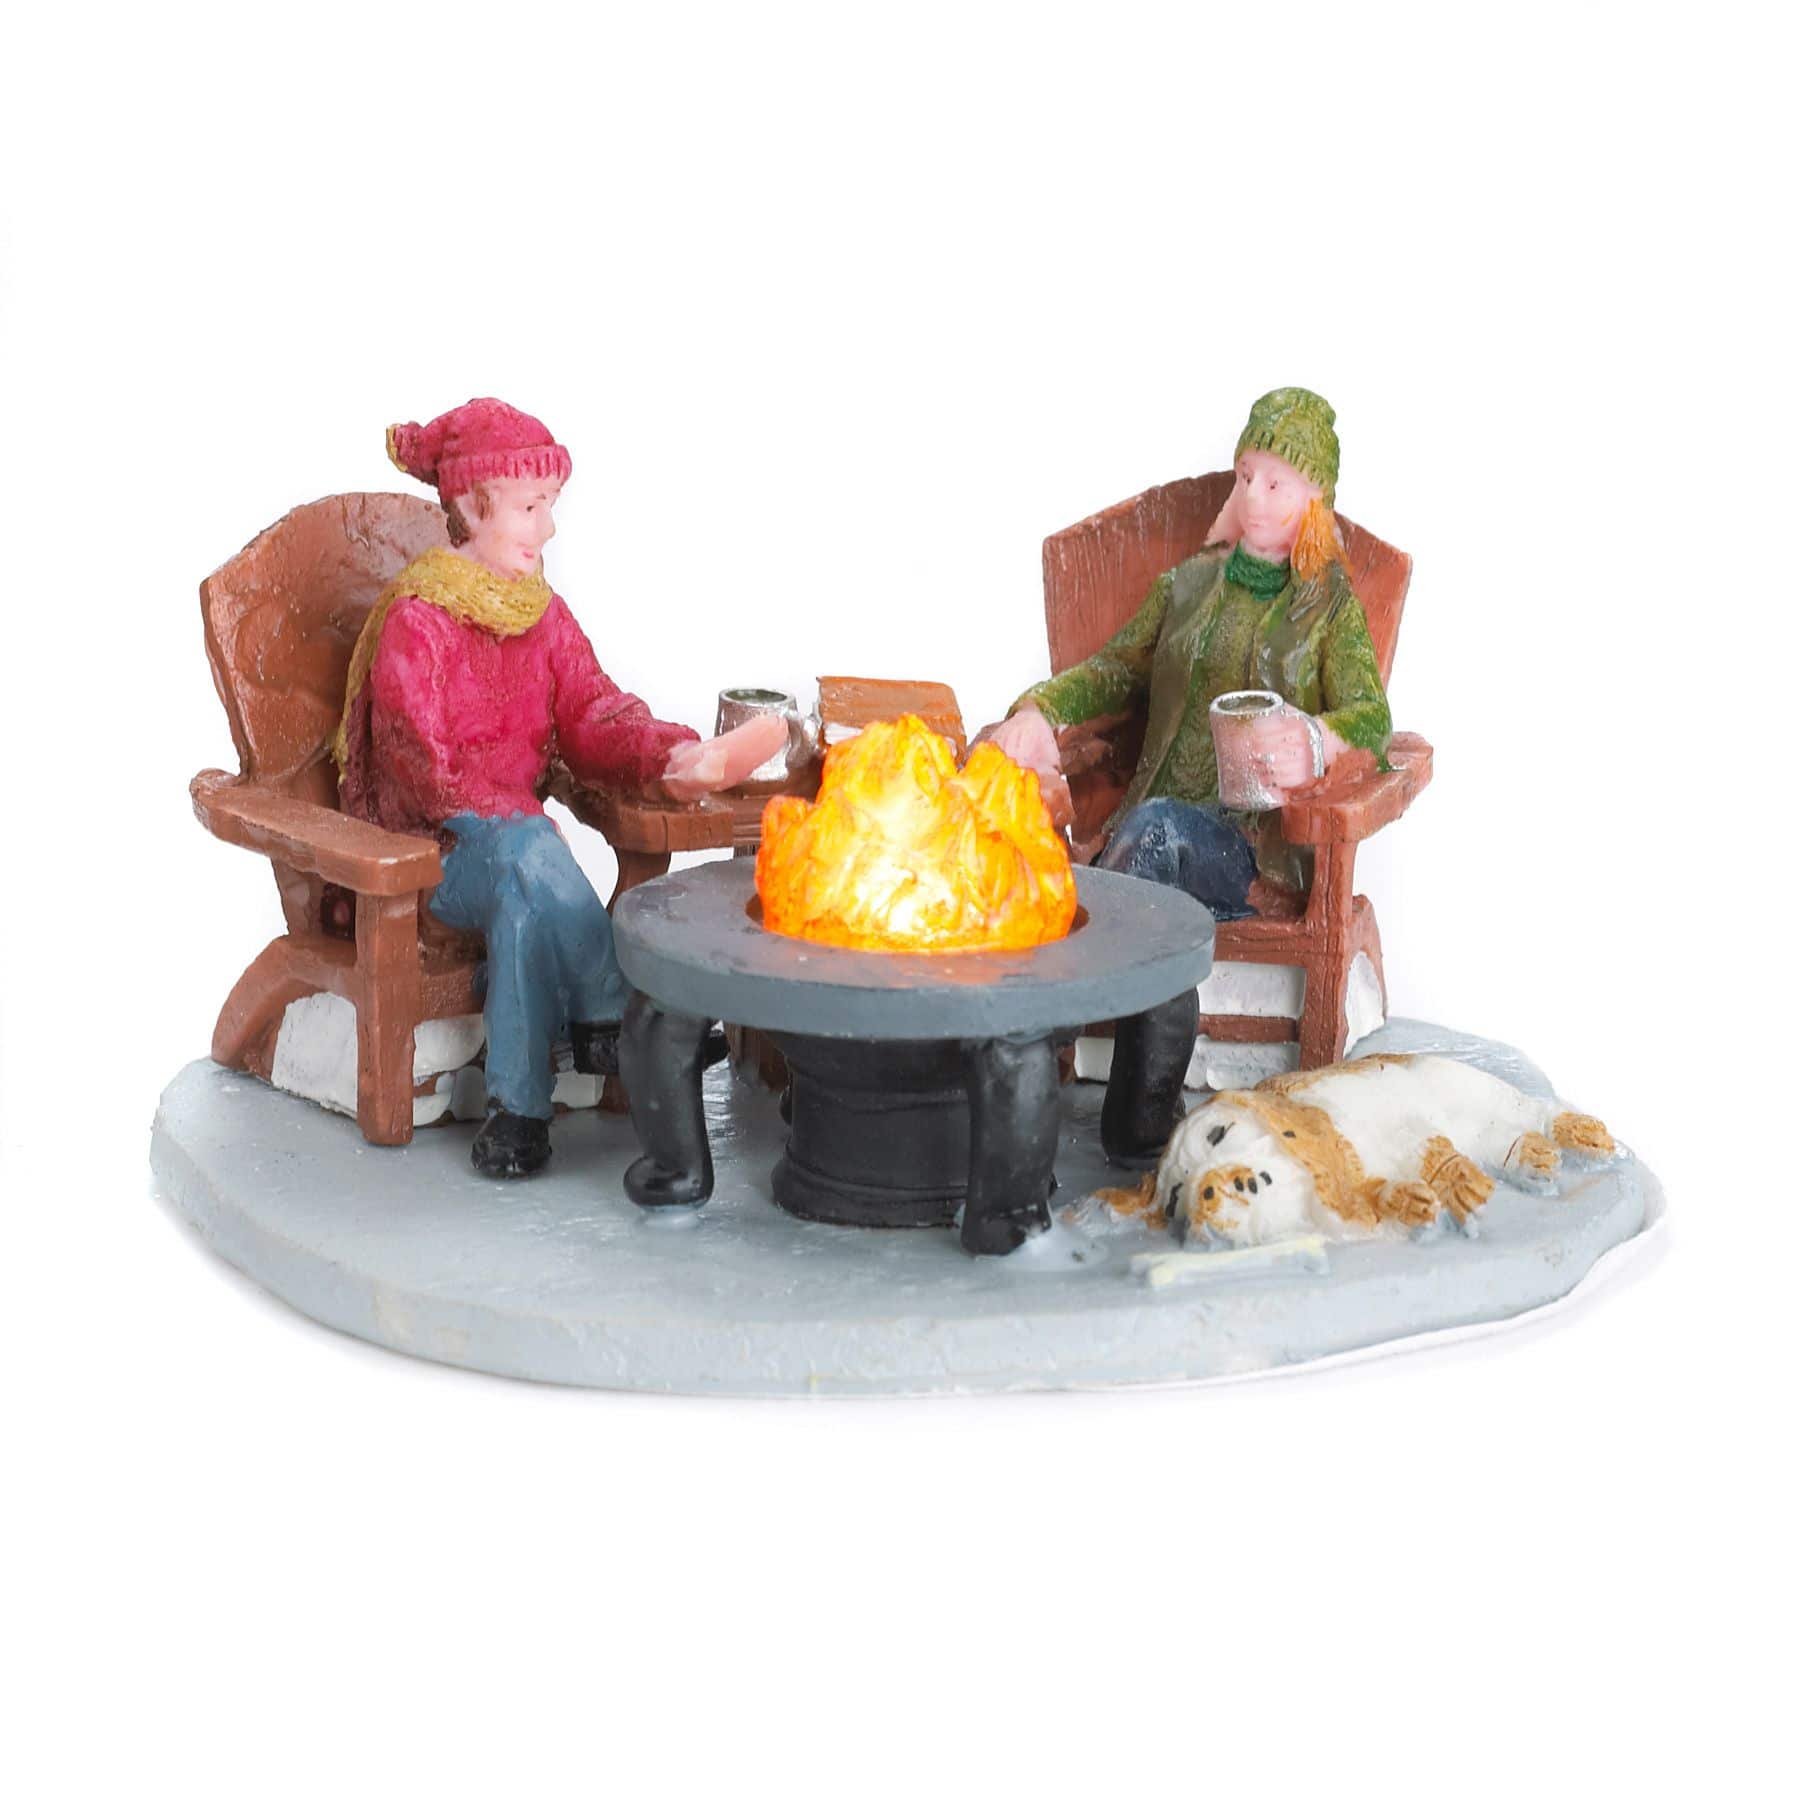 Lemax Fire Pit | Canadian Tire